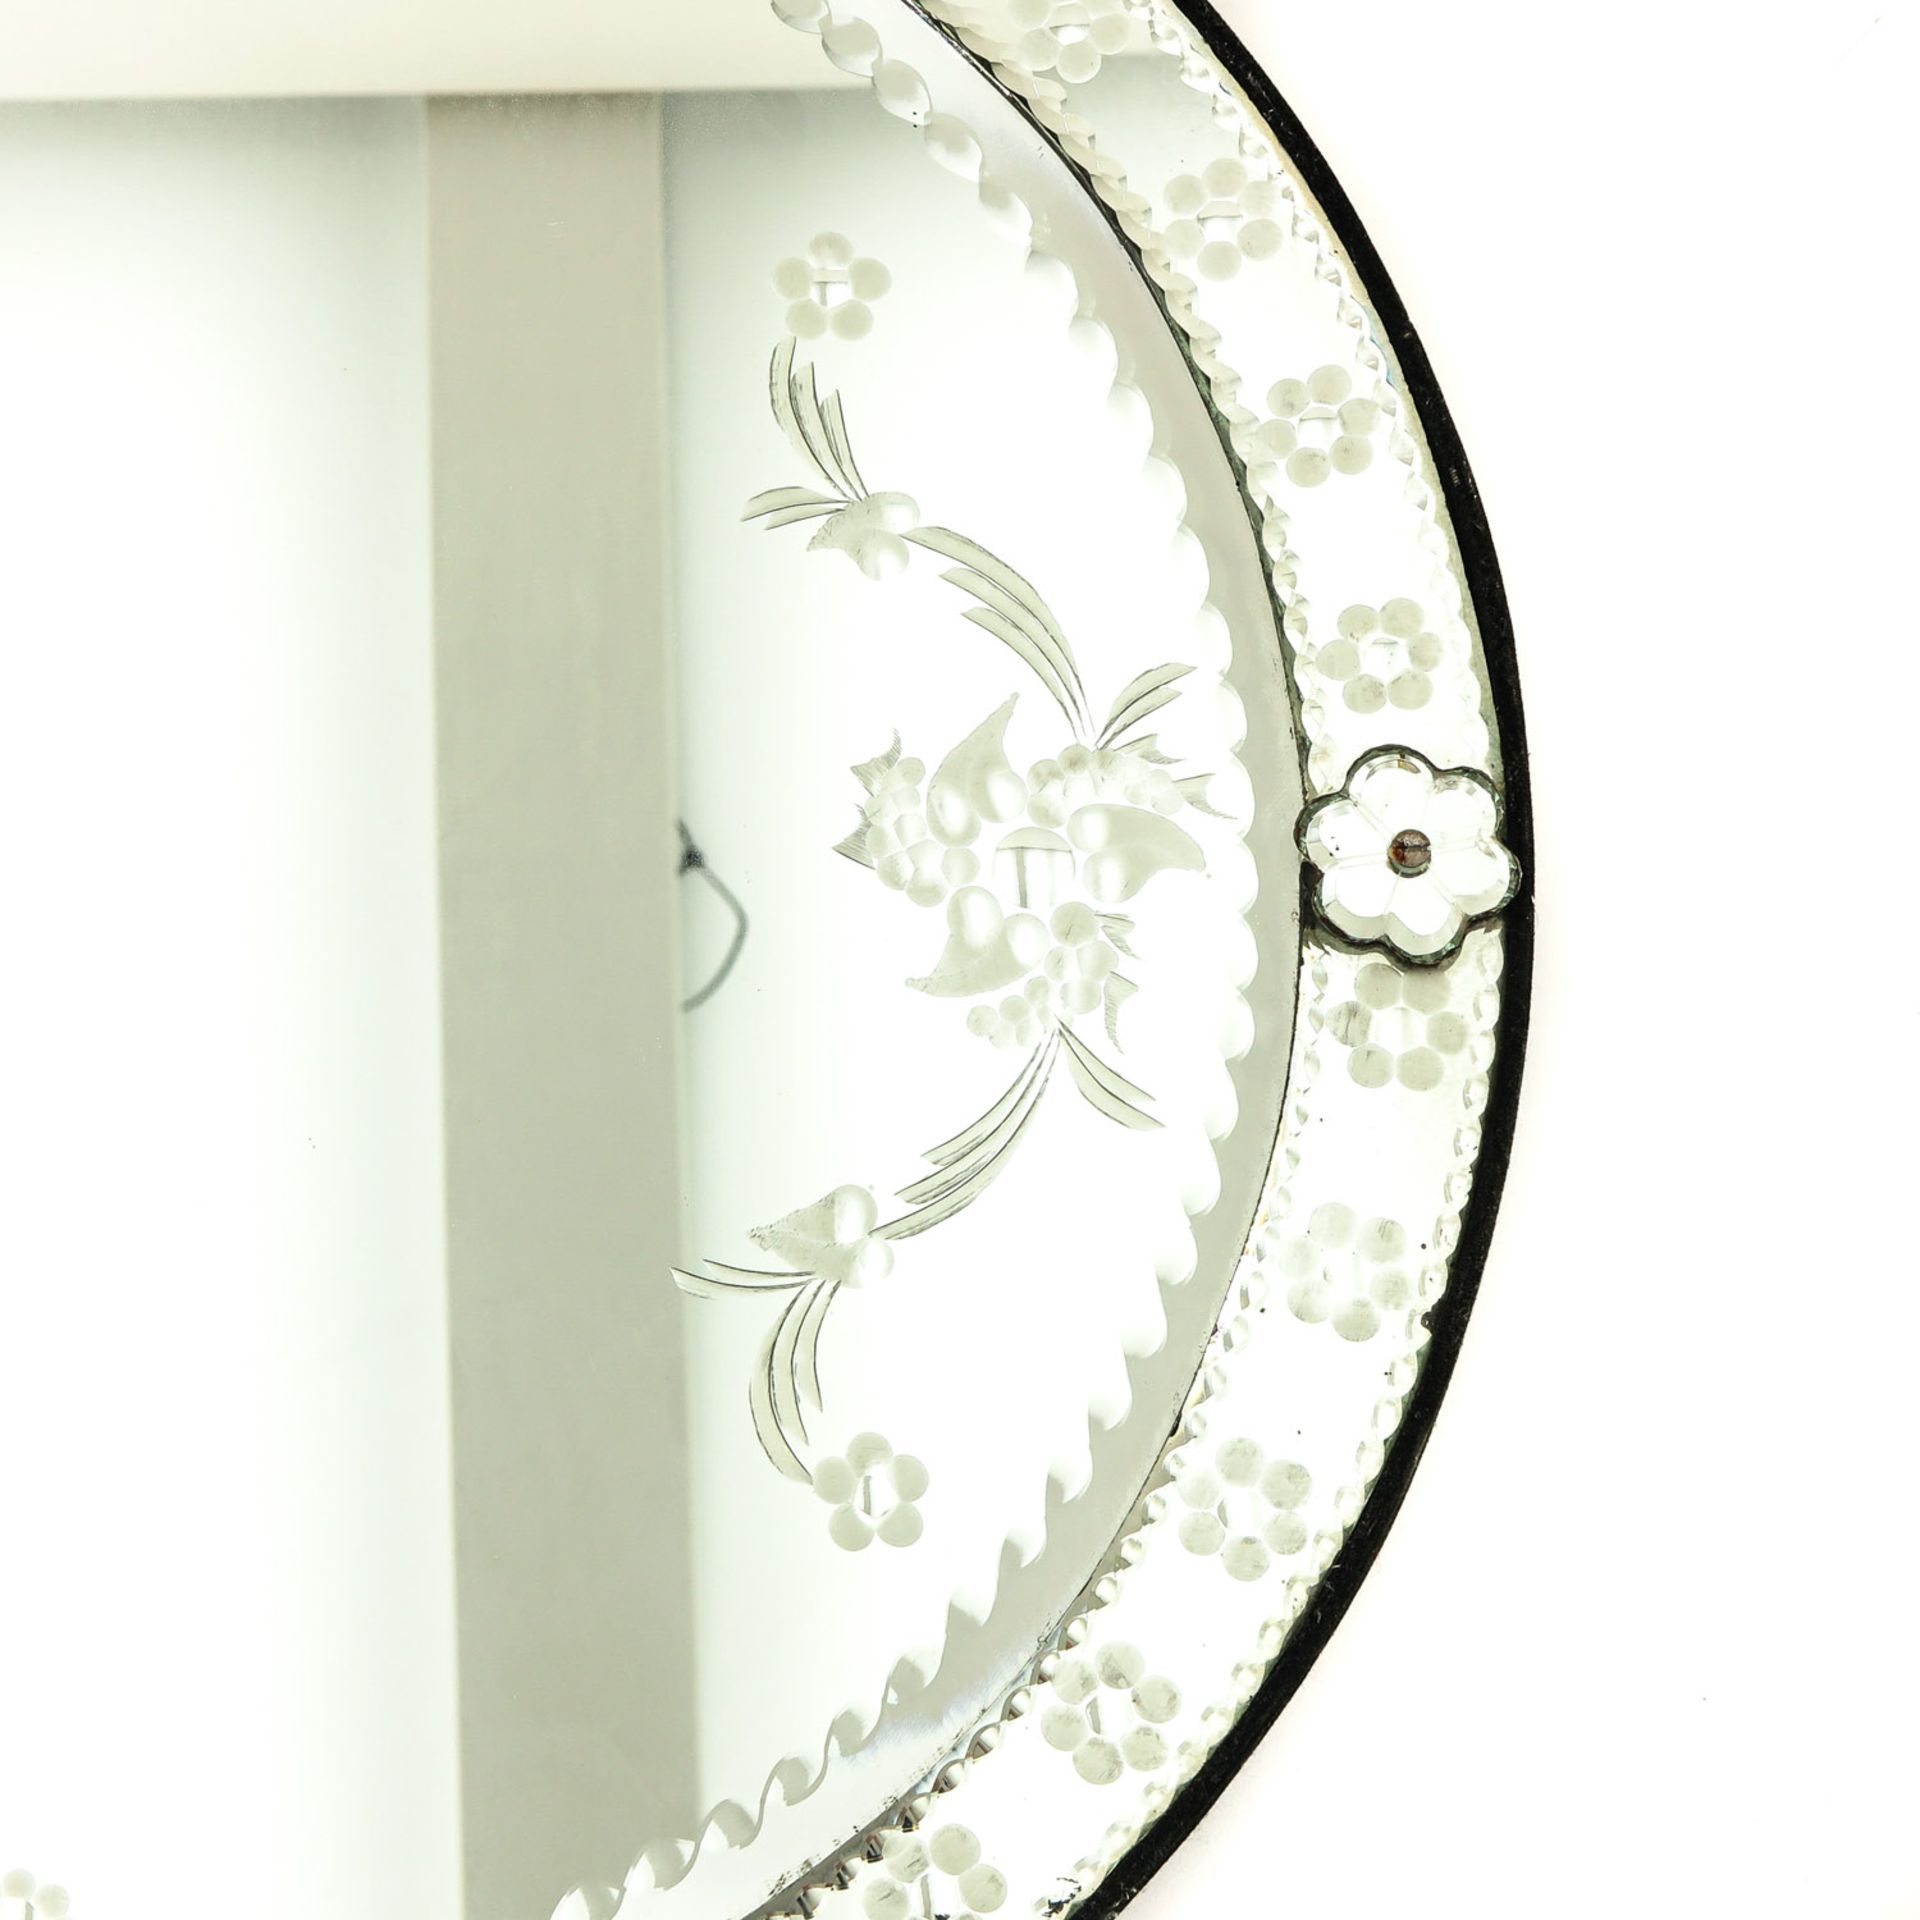 An Engraved Venetian Glass Mirror - Image 5 of 5